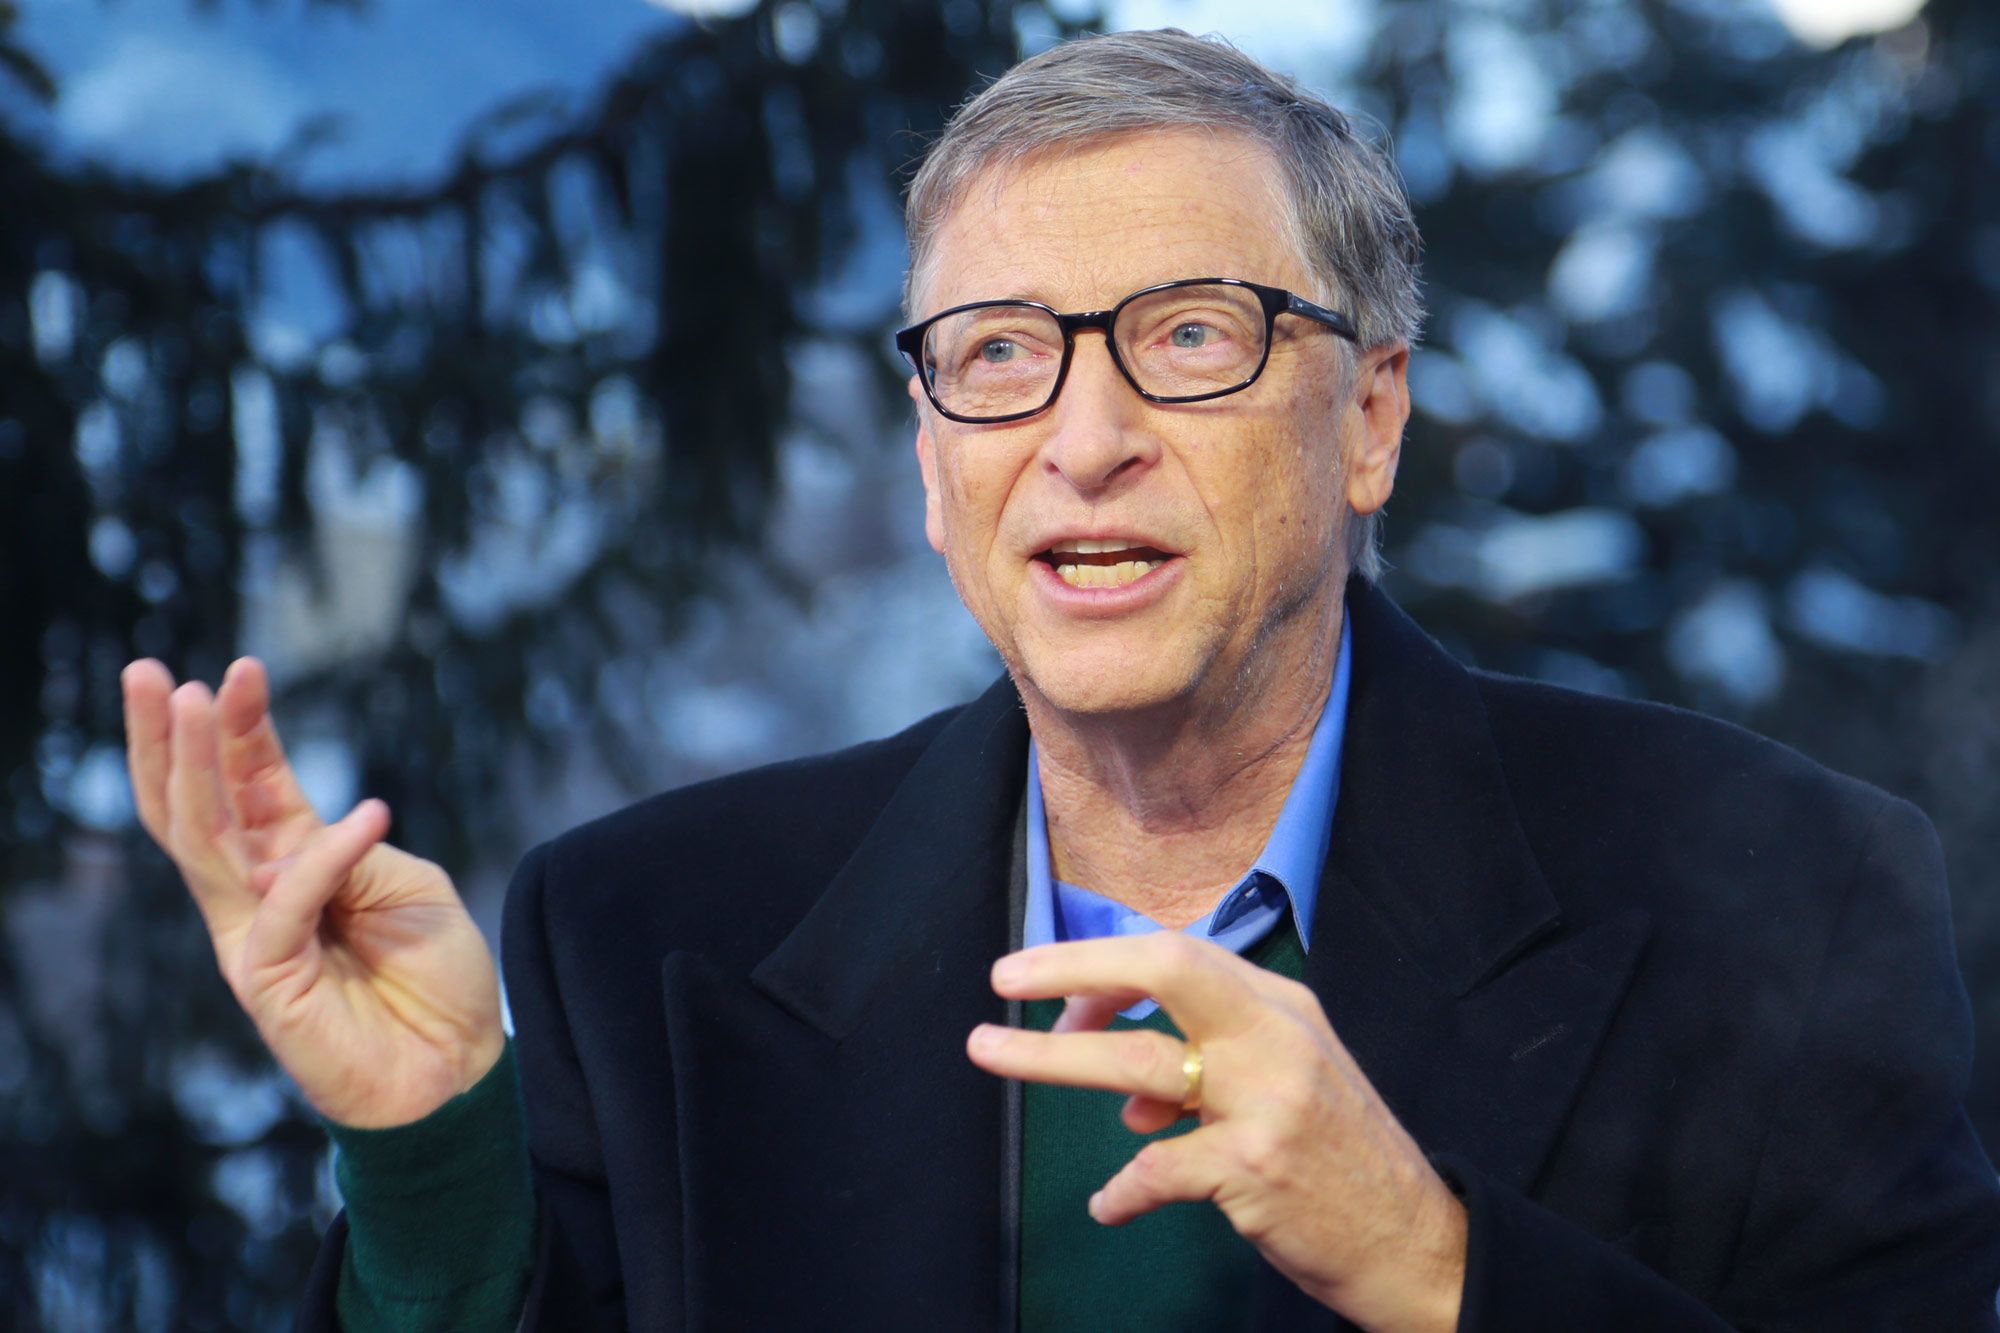 Bill Gates, Microsoft co-founder, says he'd start an AI company today